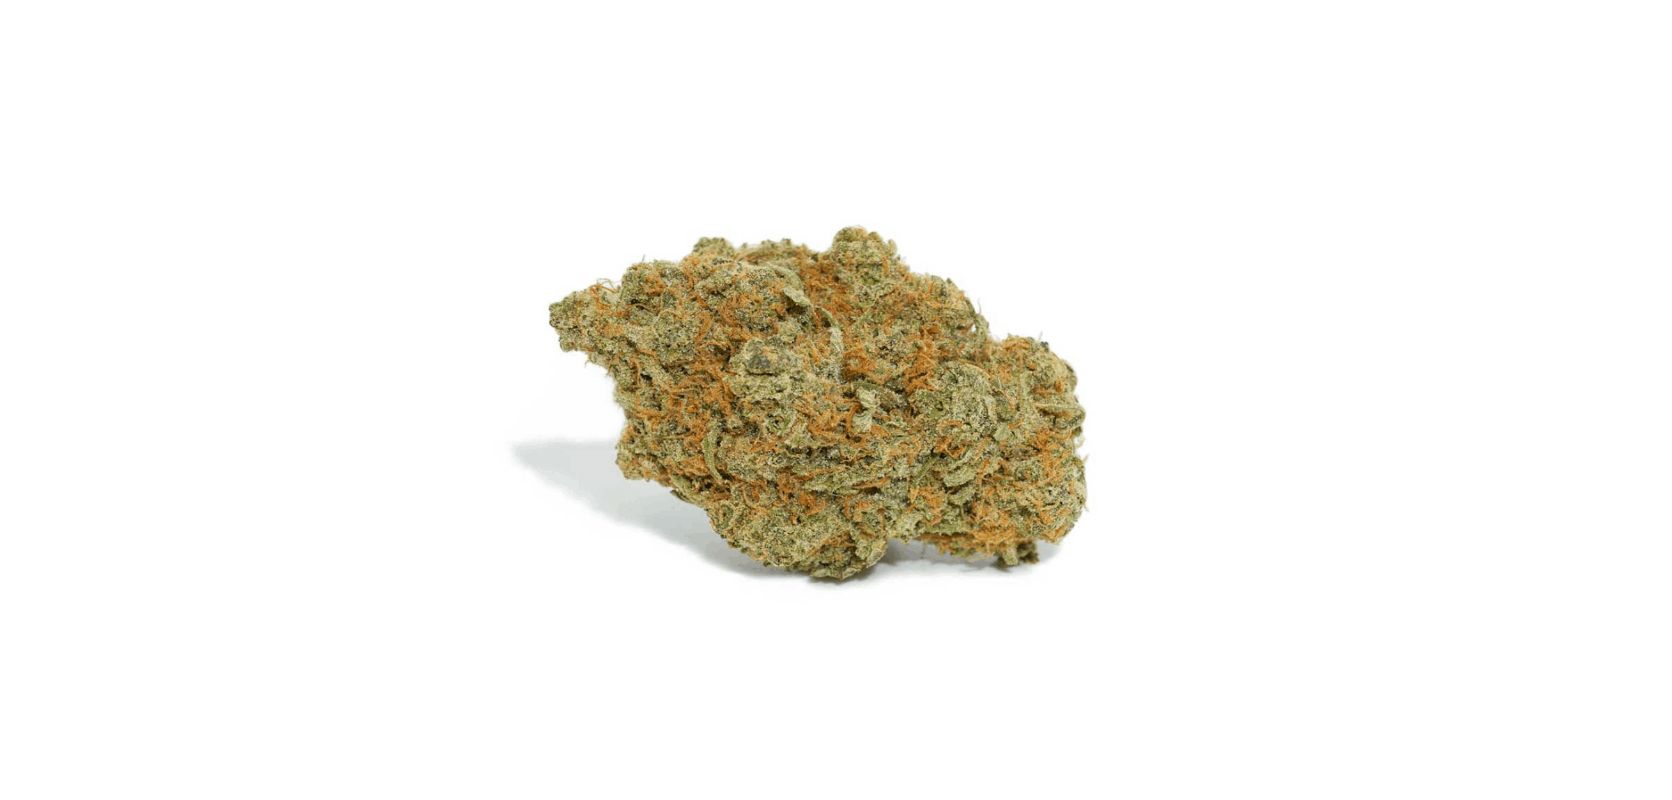 This Gorilla Bomb strain review will also look at its appearance, aroma, flavour and terpene profile to help you better understand this incredible nug.